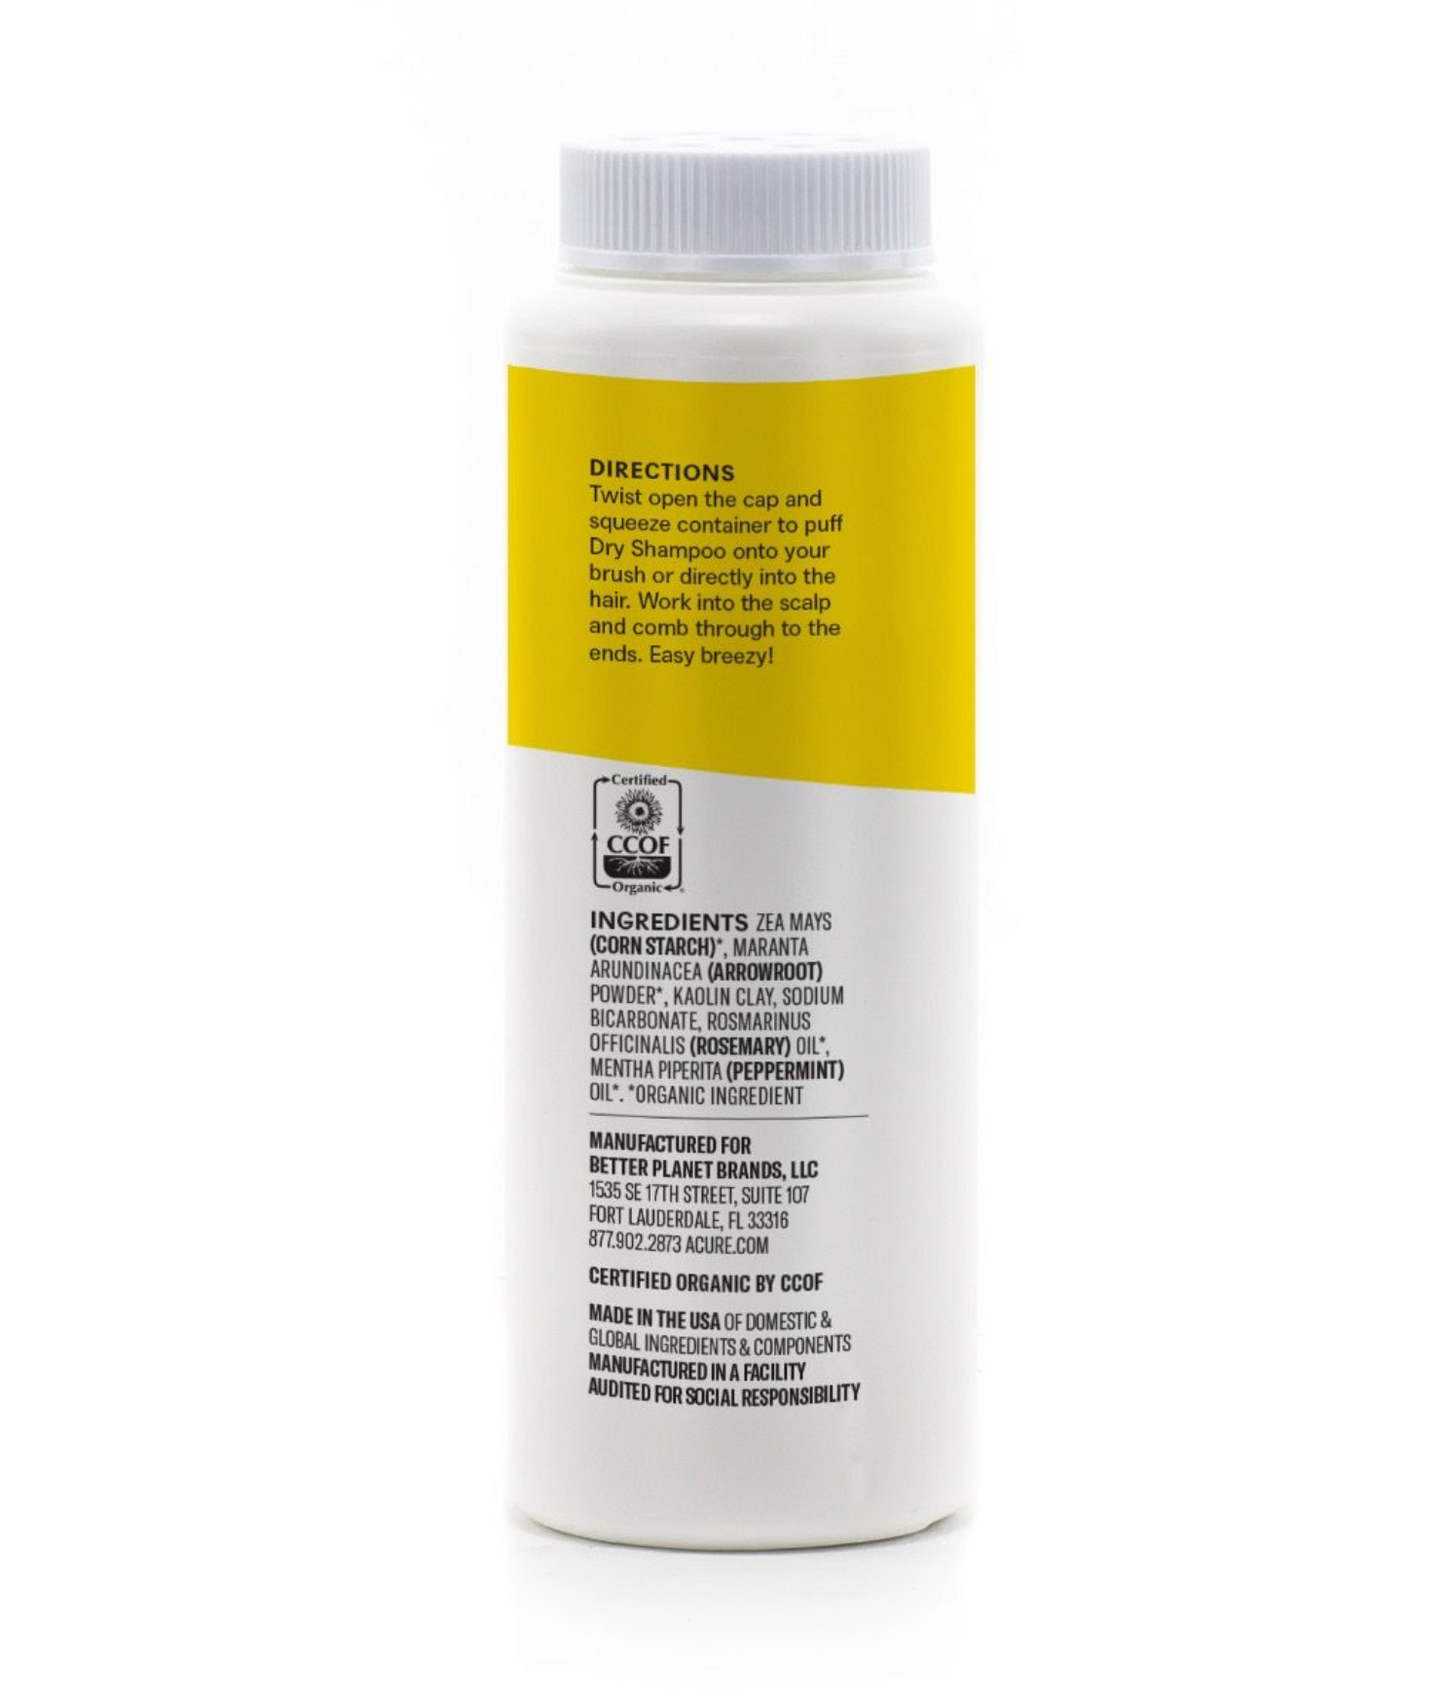 Acure Dry Shampoo 58g, All Hair Types With Rosemary & Peppermint